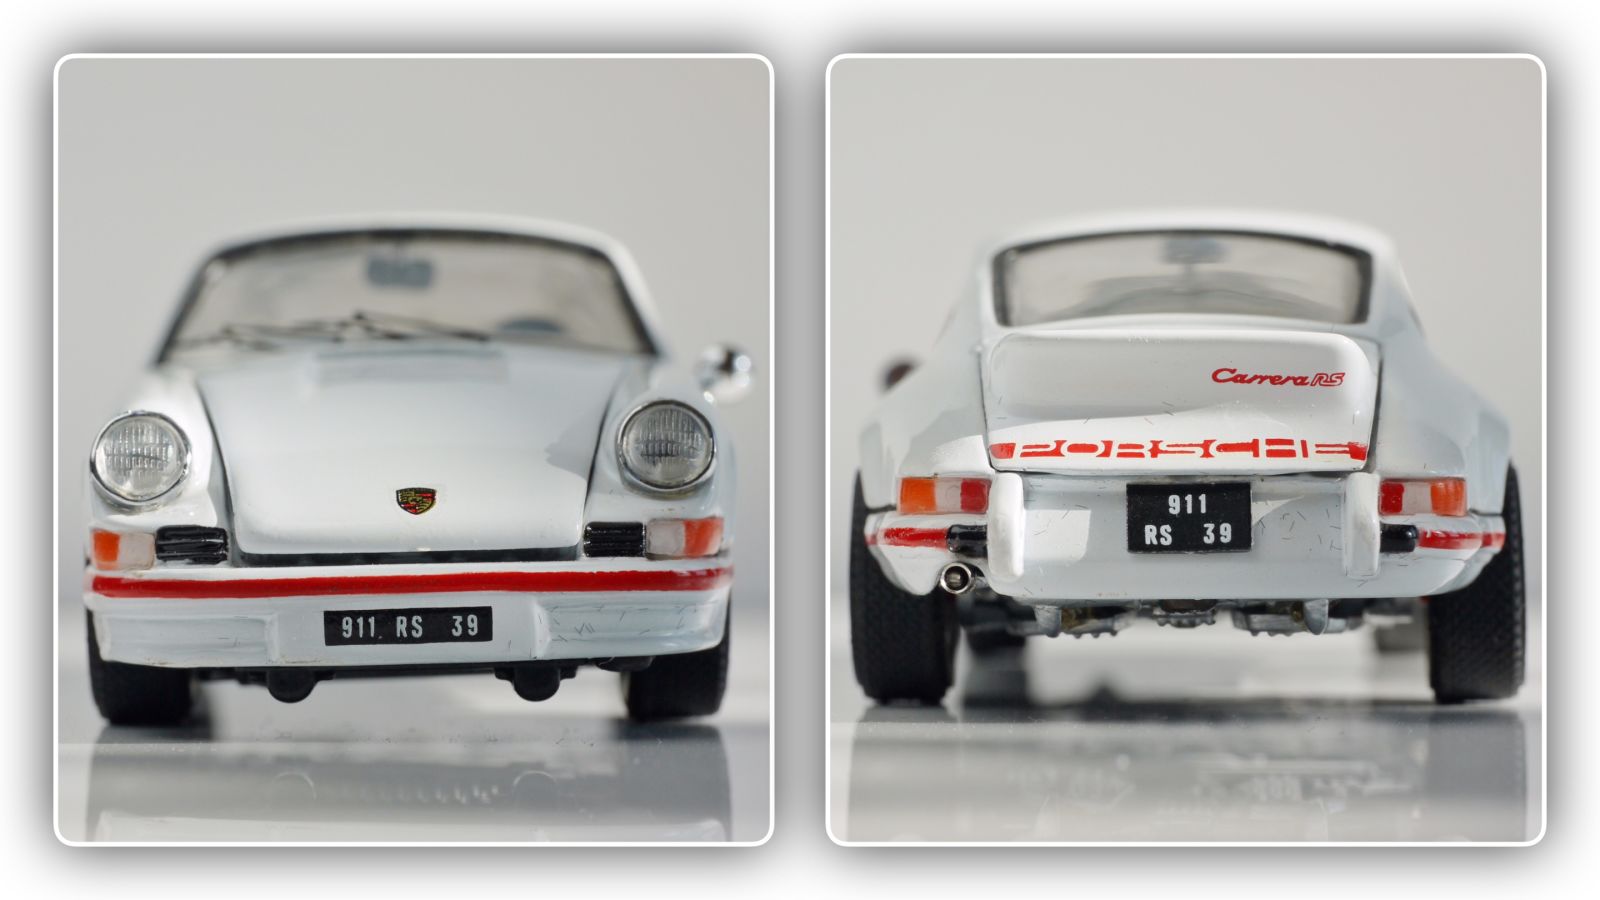 Illustration for article titled LaLD Car Week: Teutonic Tuesday - 1/43 Jouef Evolution 1973 Carrera RS 2.7